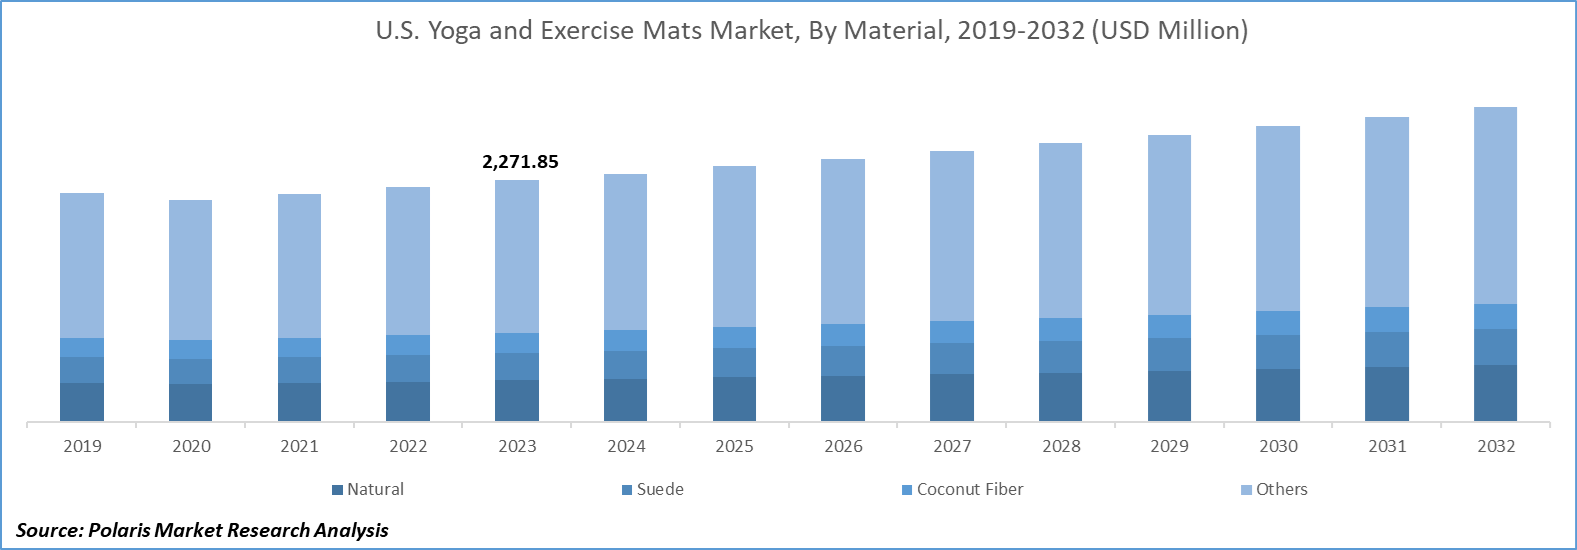 Yoga and Exercise Mats Market